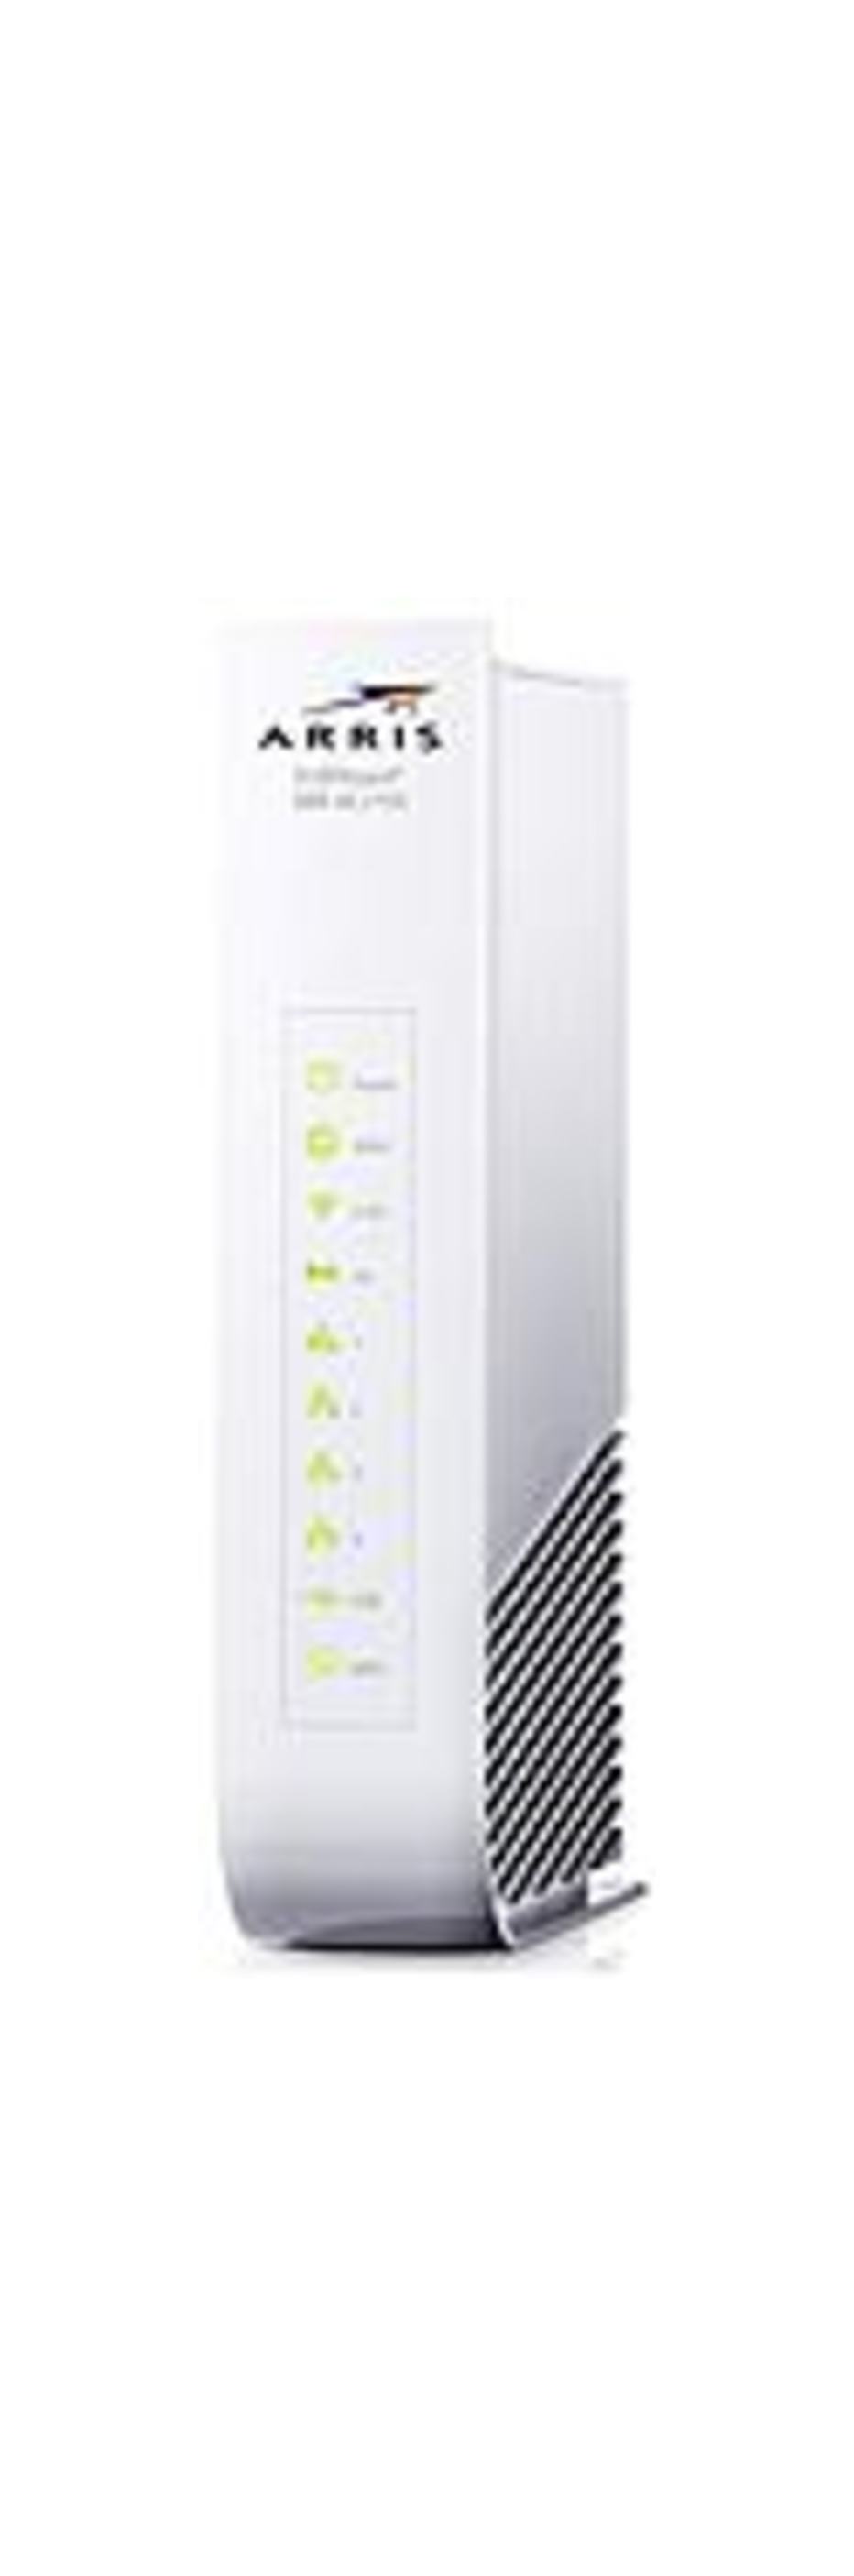 ARRIS SURFboard SBR-AC1750 Dual-Band Wireless Router - Wi-Fi - 1750 Mbps - White